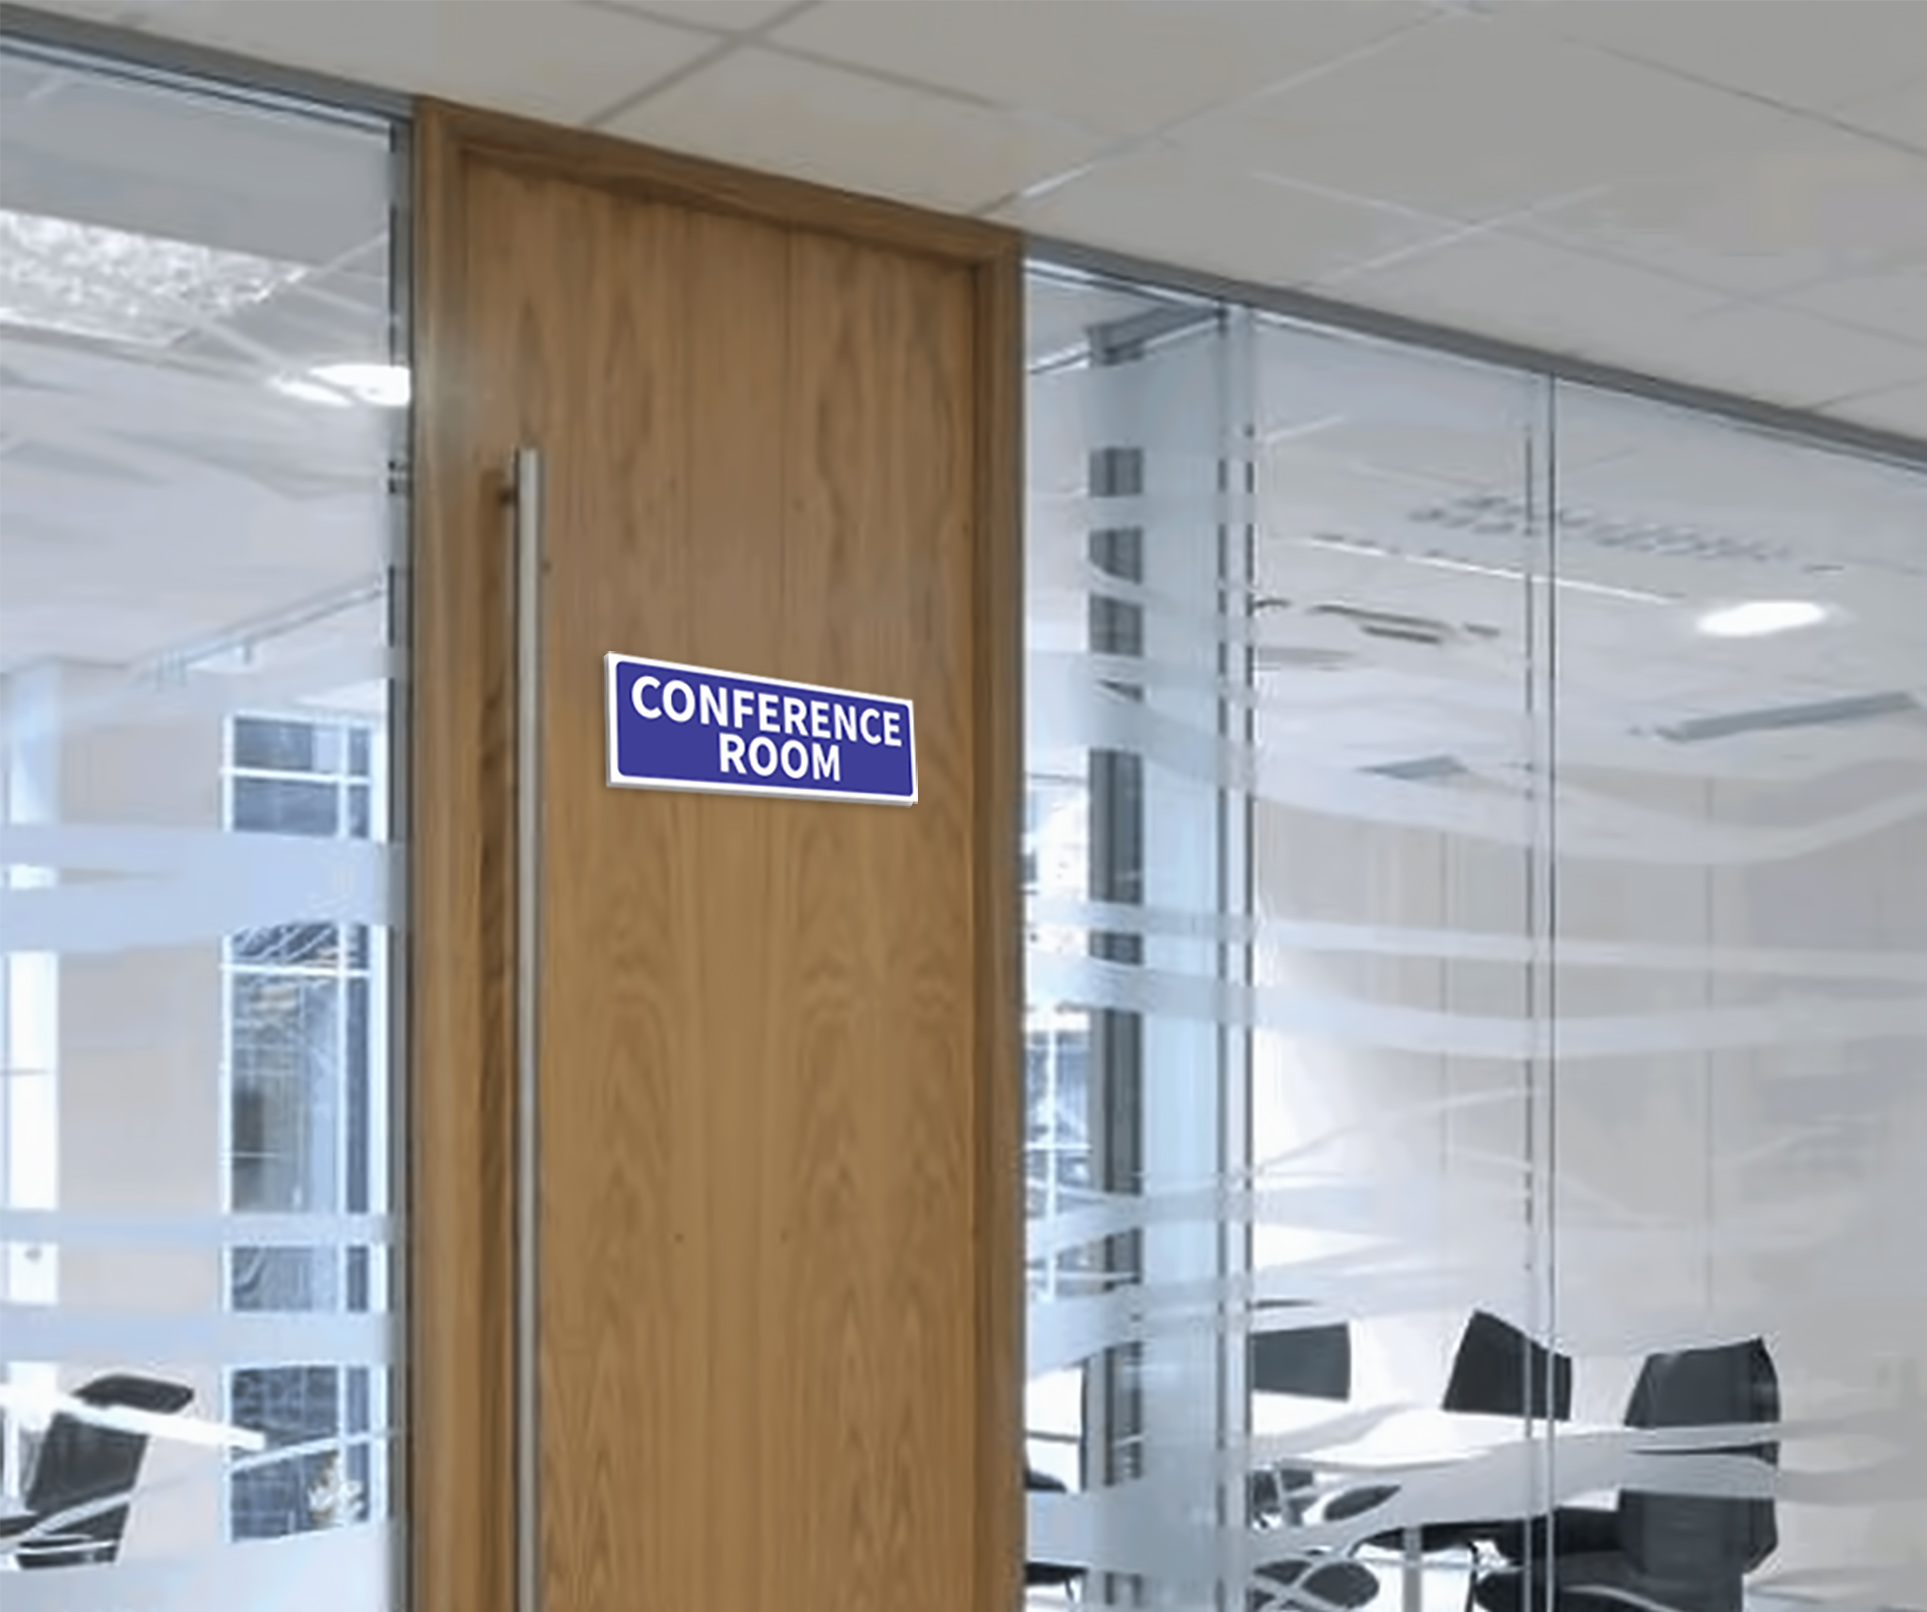 “Conference Room” for Office Foam Sign Board – 18 in x 6.5 in